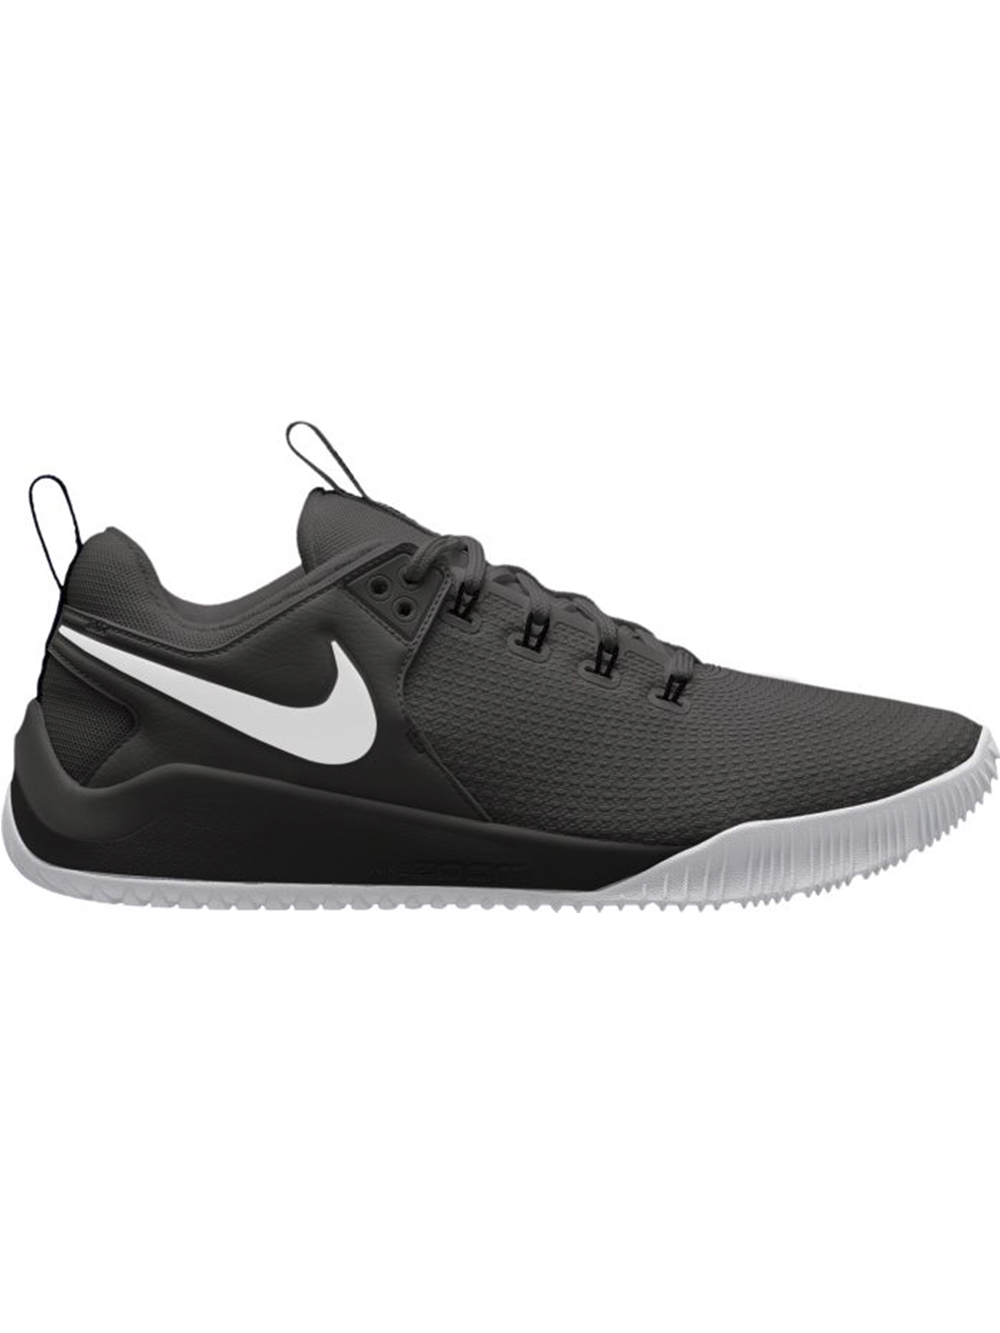 Women's Nike Zoom HyperAce 2 Shoes - Black/White | Midwest Volleyball Warehouse